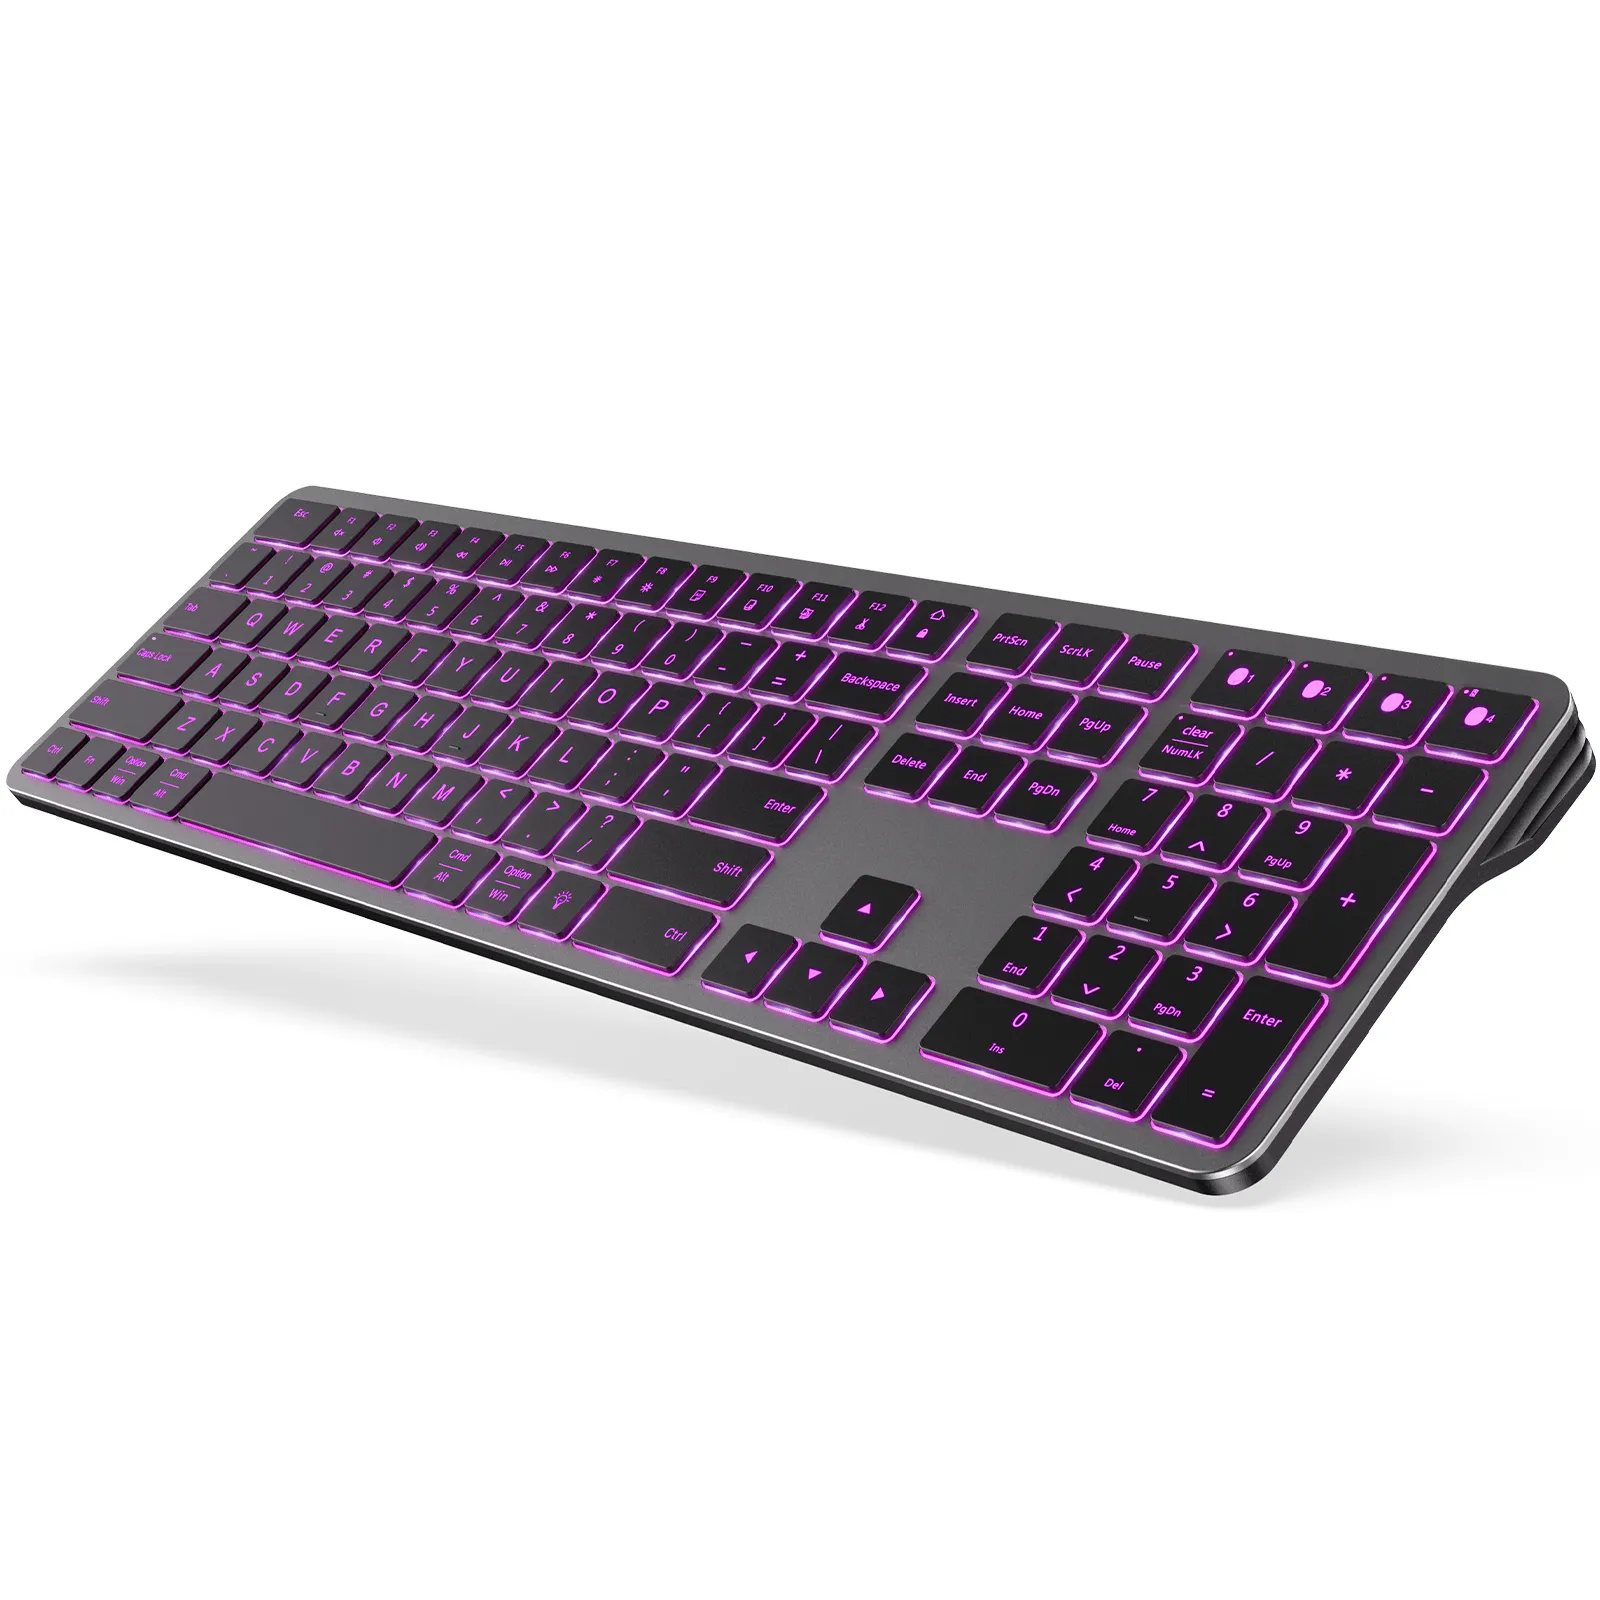 Seenda RGB Backlit Keyboards Multi-Device Rechargeable Wireless BT Keyboard for Windows Mac OS iOS Android